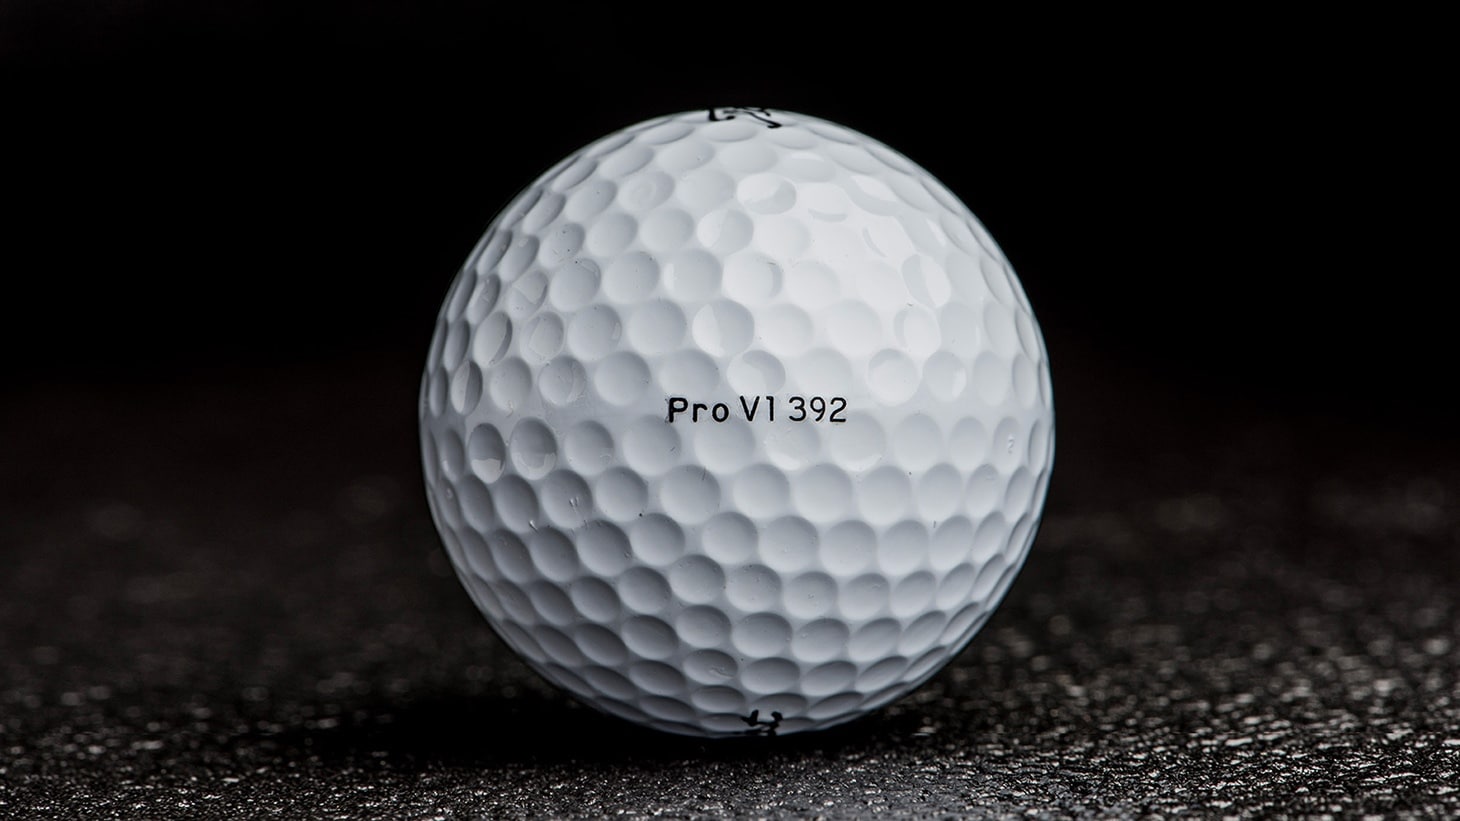 The original 2001 Pro V1 golf ball featured a simple, block print sidestamp